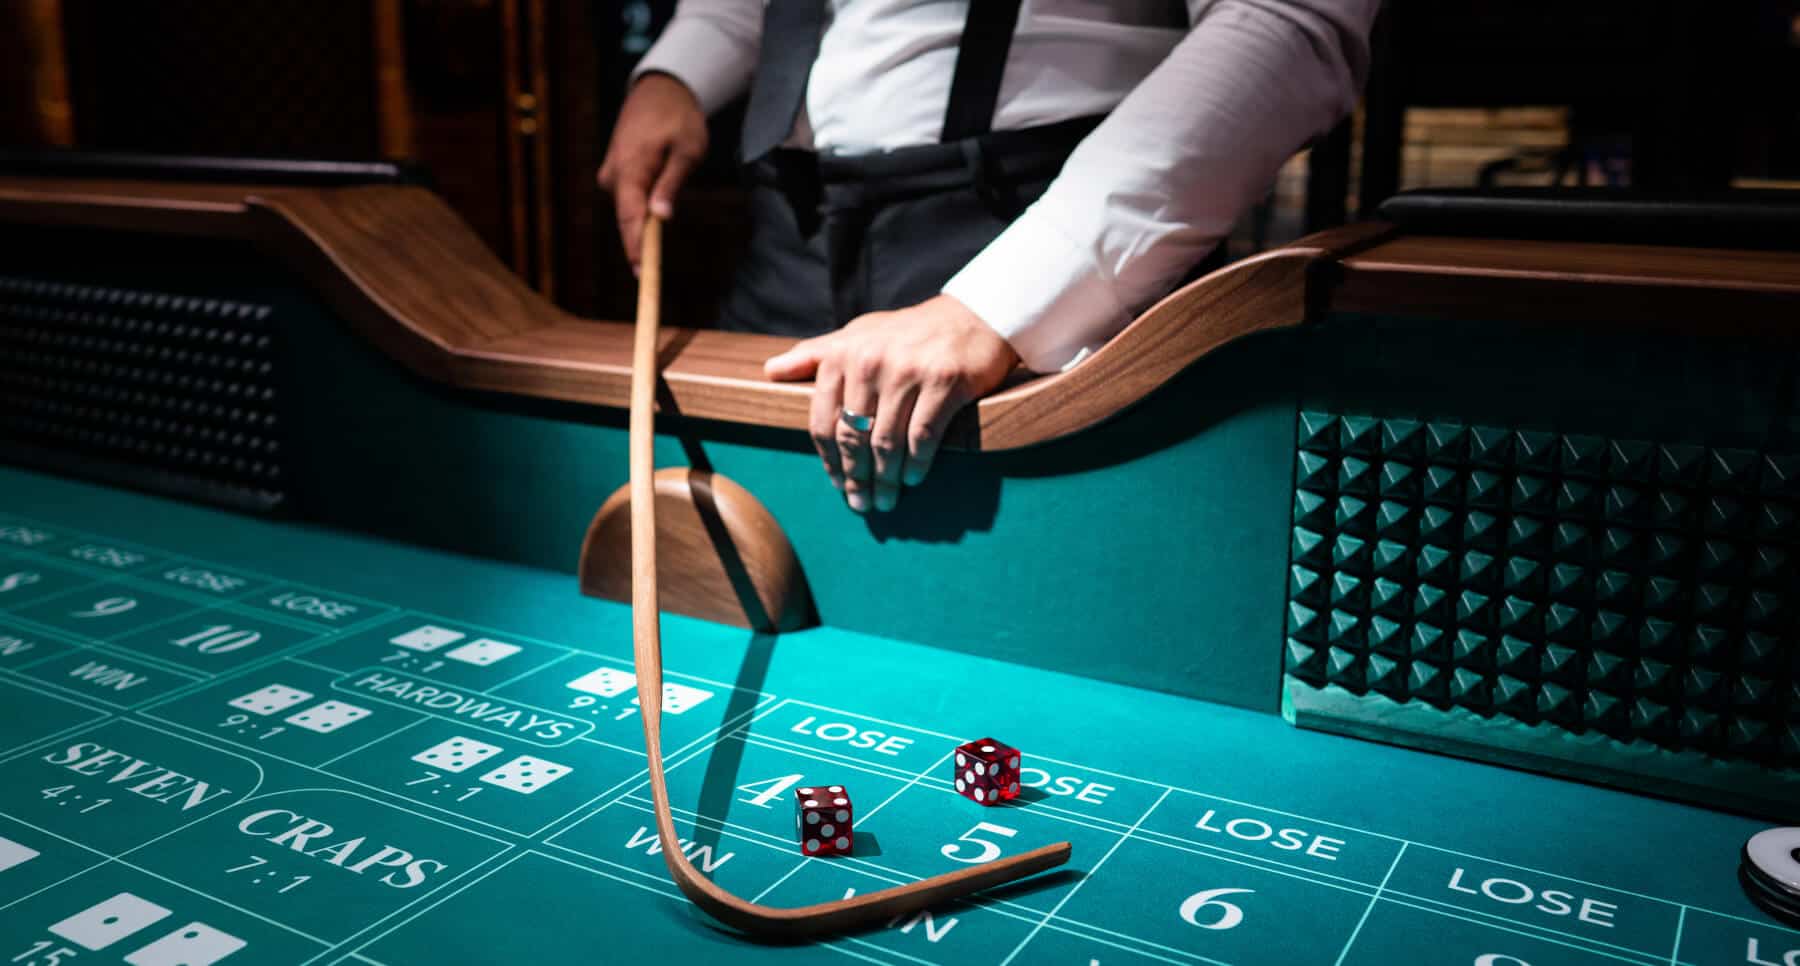 How play craps at the casino games